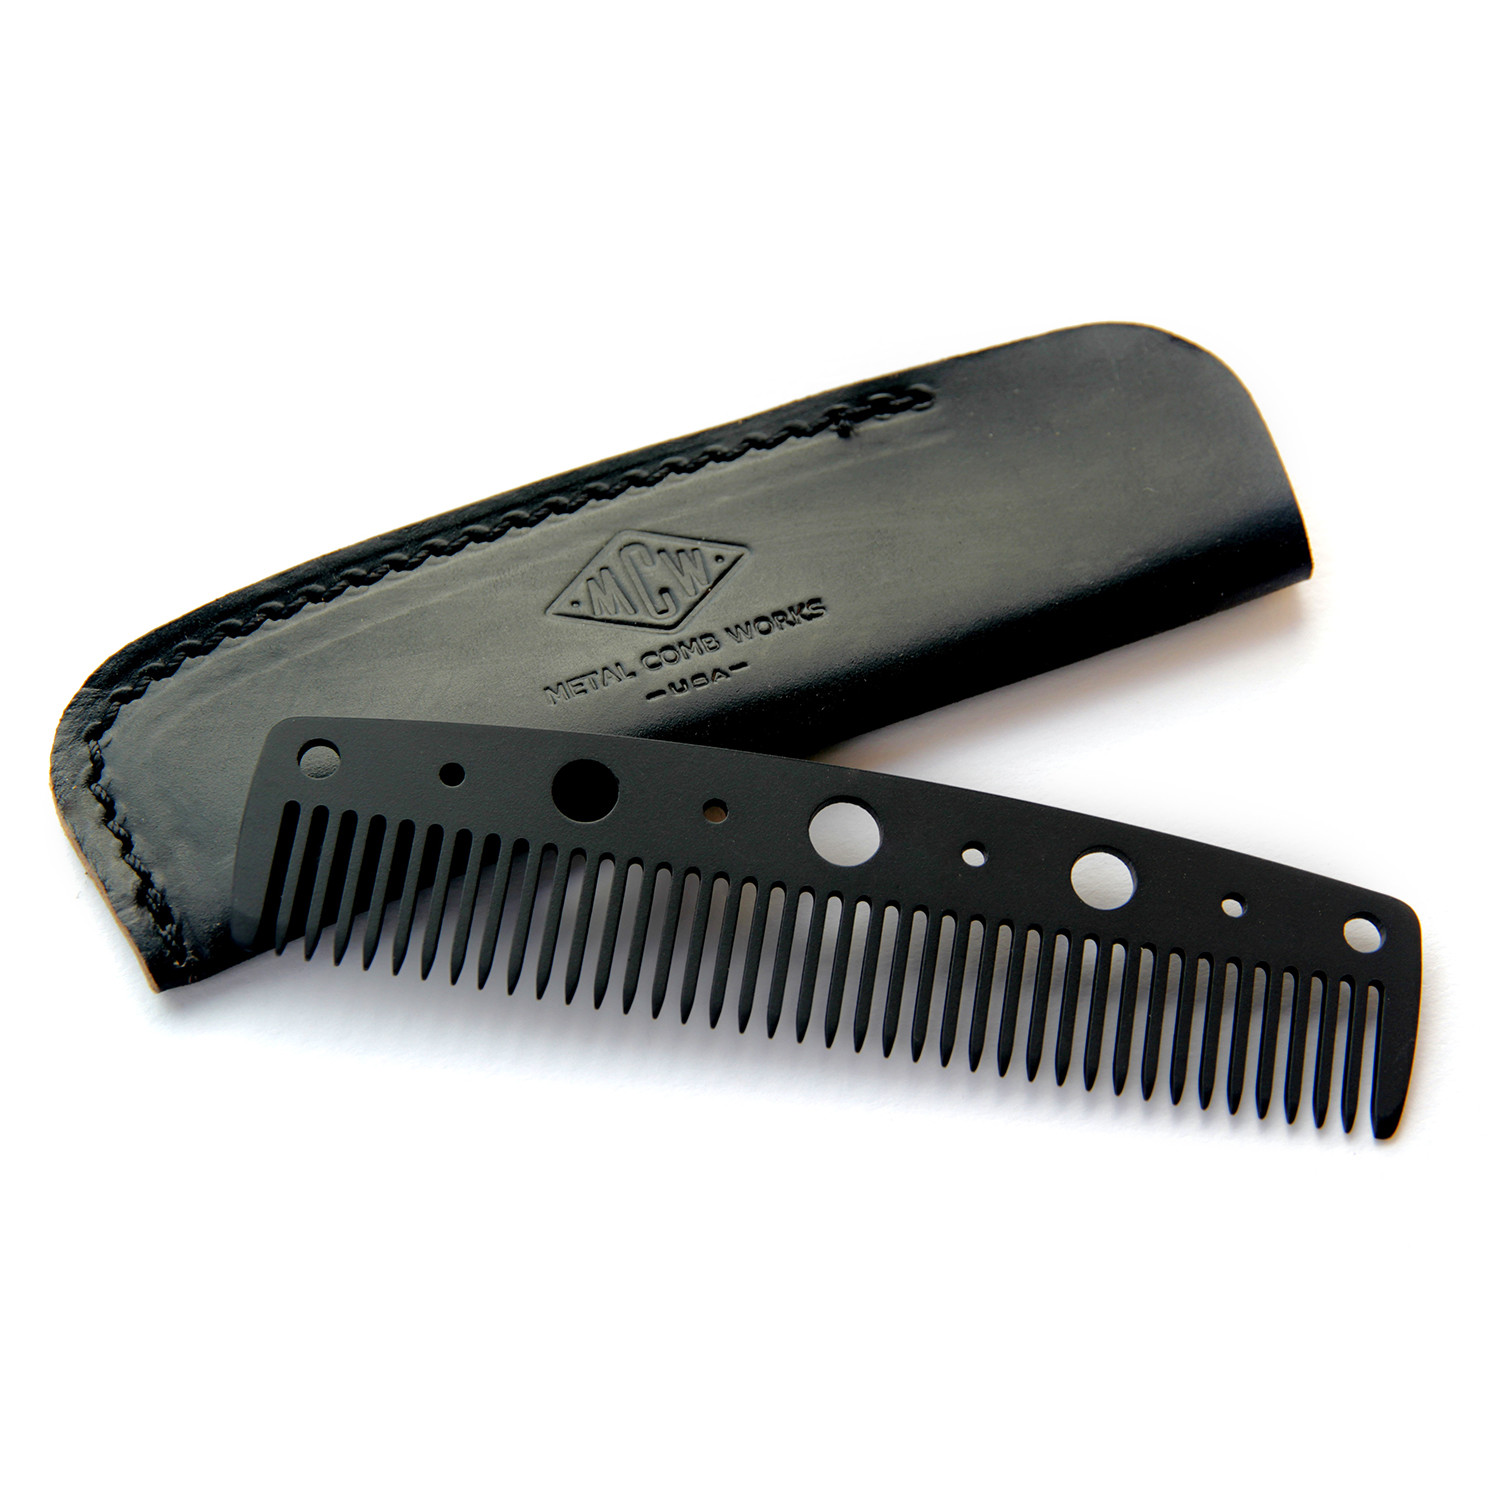 Black Out Comb + Sheath (Skull + Bones) - Metal Comb Works - Touch of ...